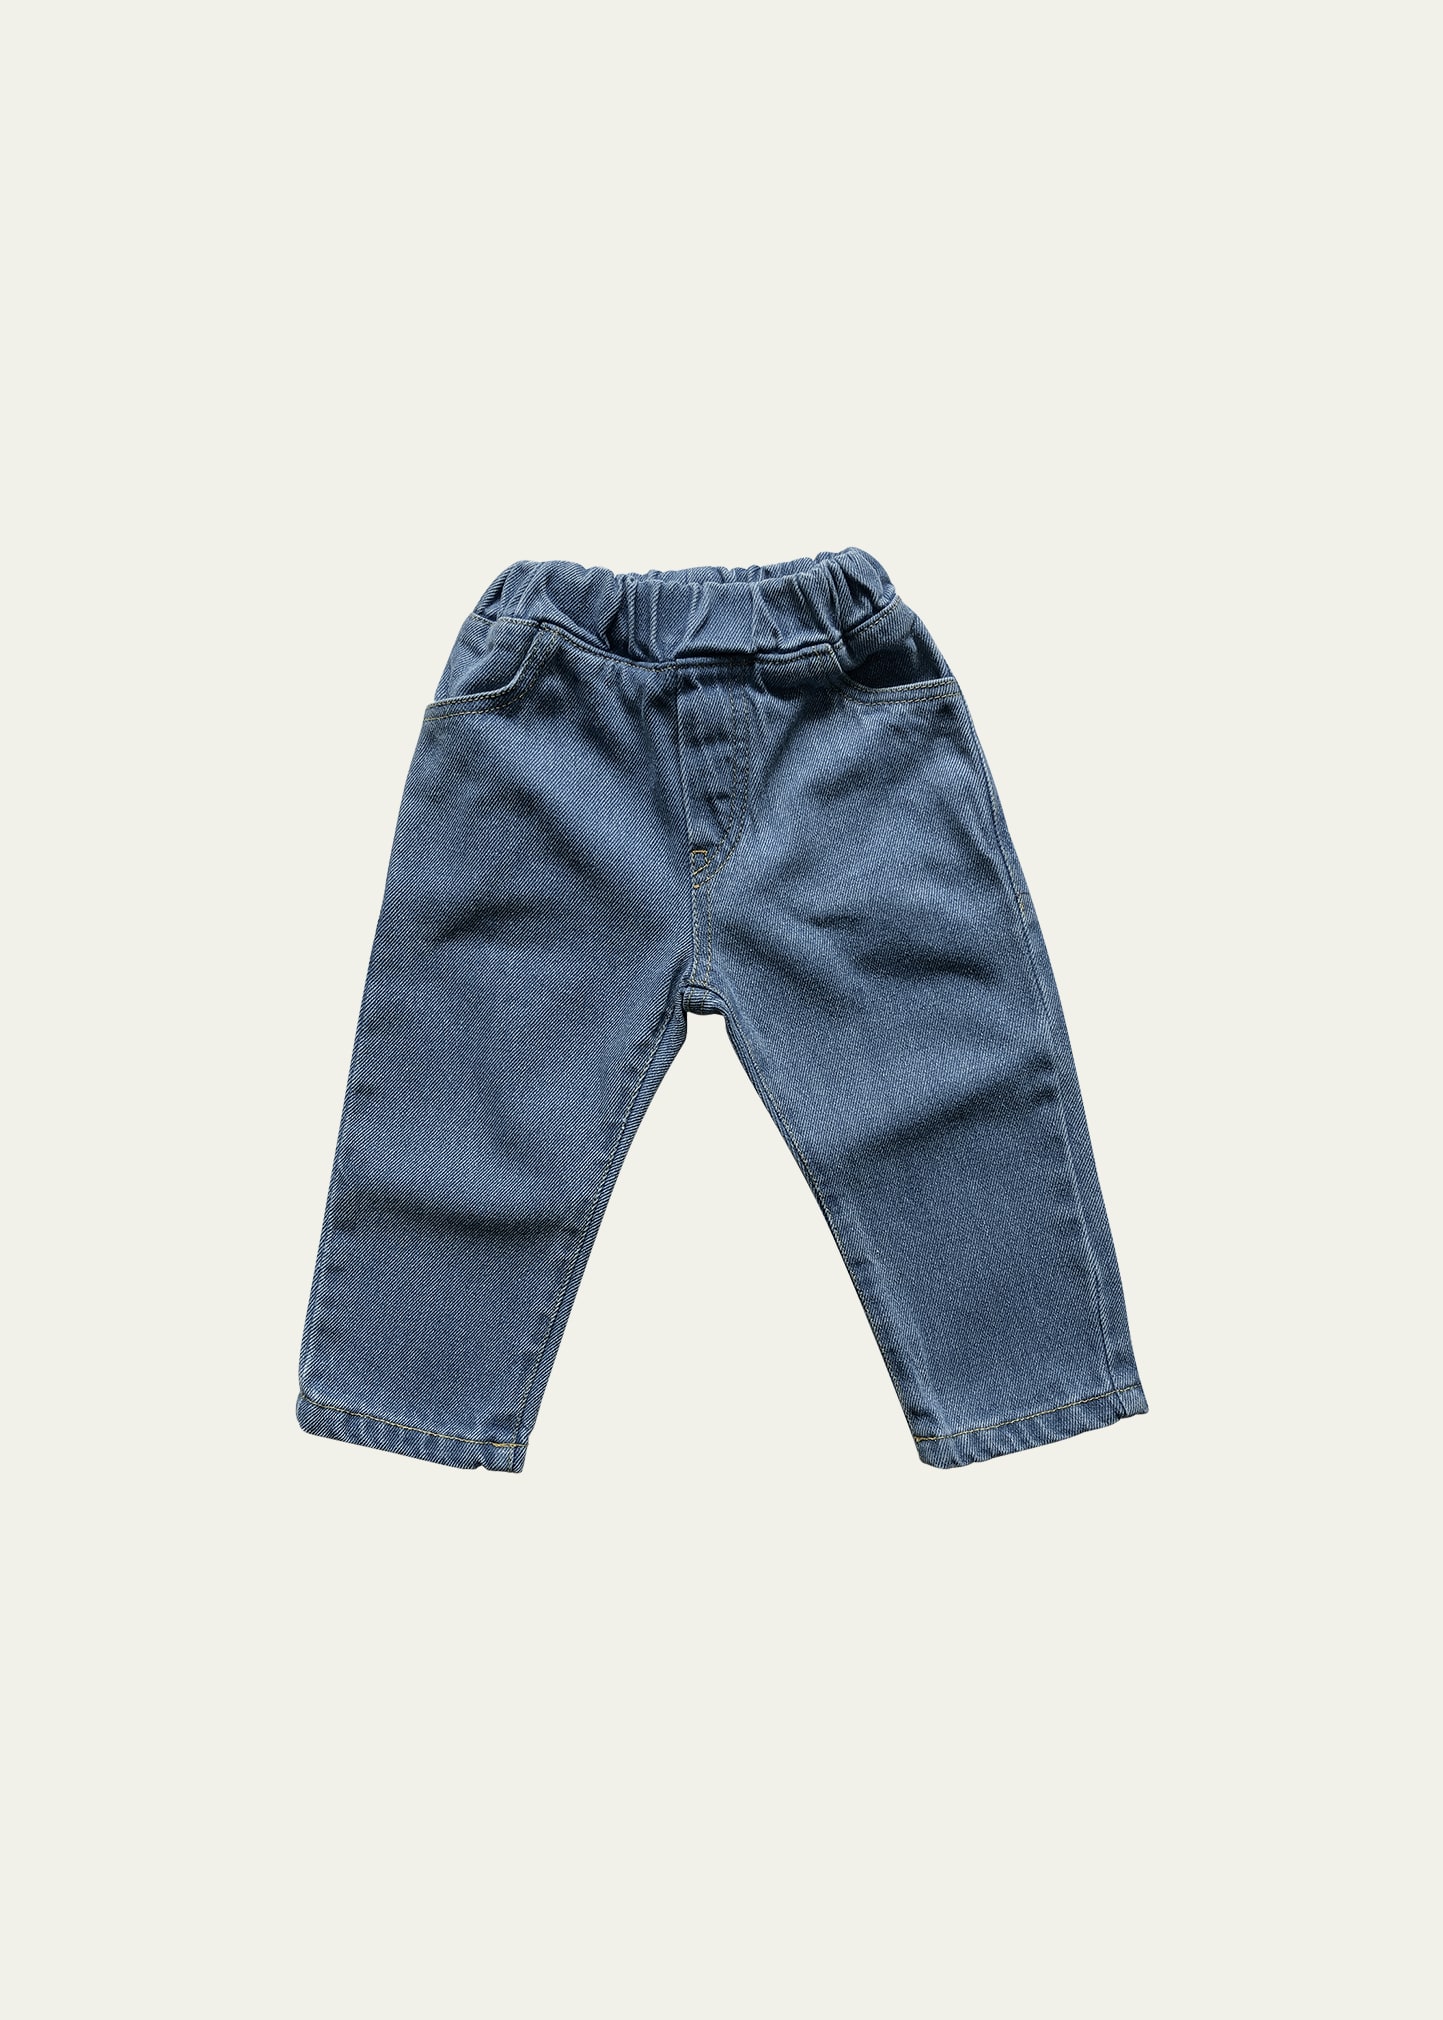 The Simple Folk Child Boy And Child Girl Vintage-style Cotton Perfect Jean In Light Denim